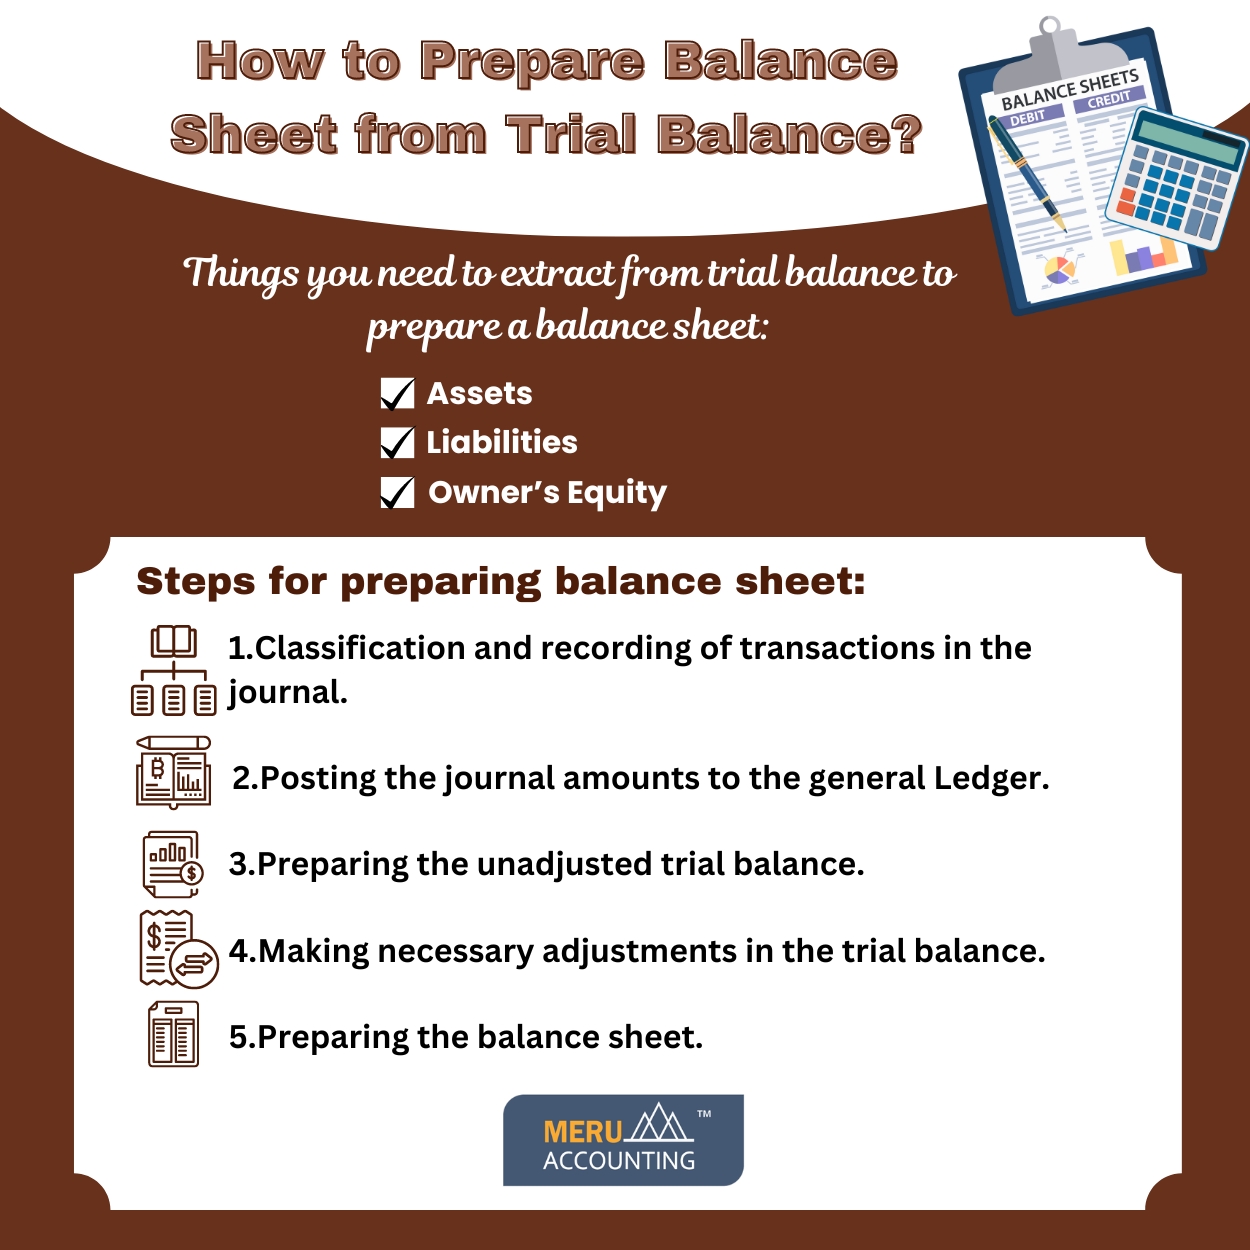 How to Prepare Balance Sheet from Trial Balance 1250 by 1250 1